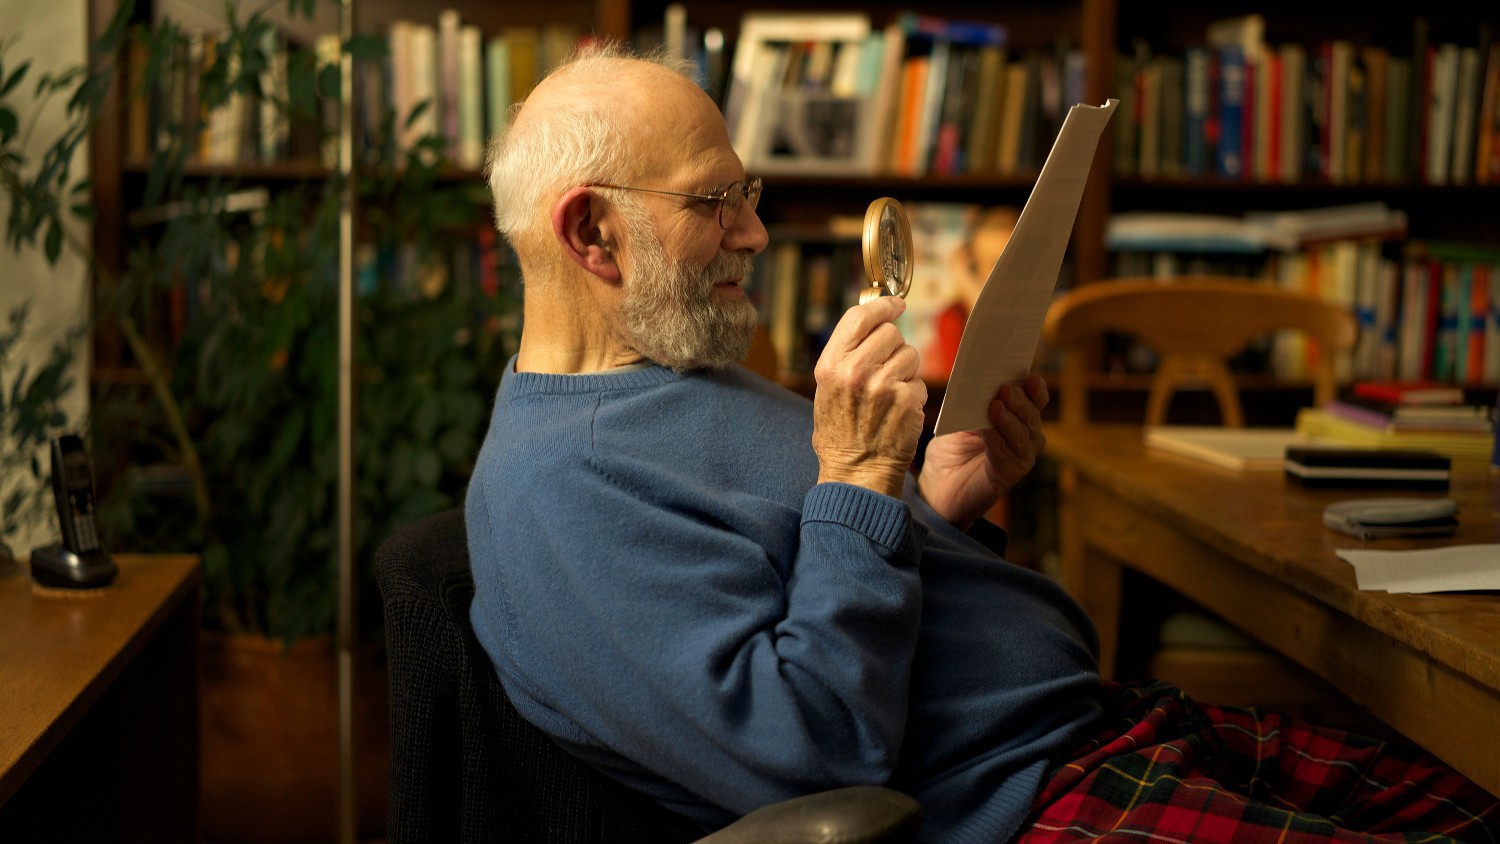 Neurologist Oliver Sacks' legacy and final days explored in 'His Own Life